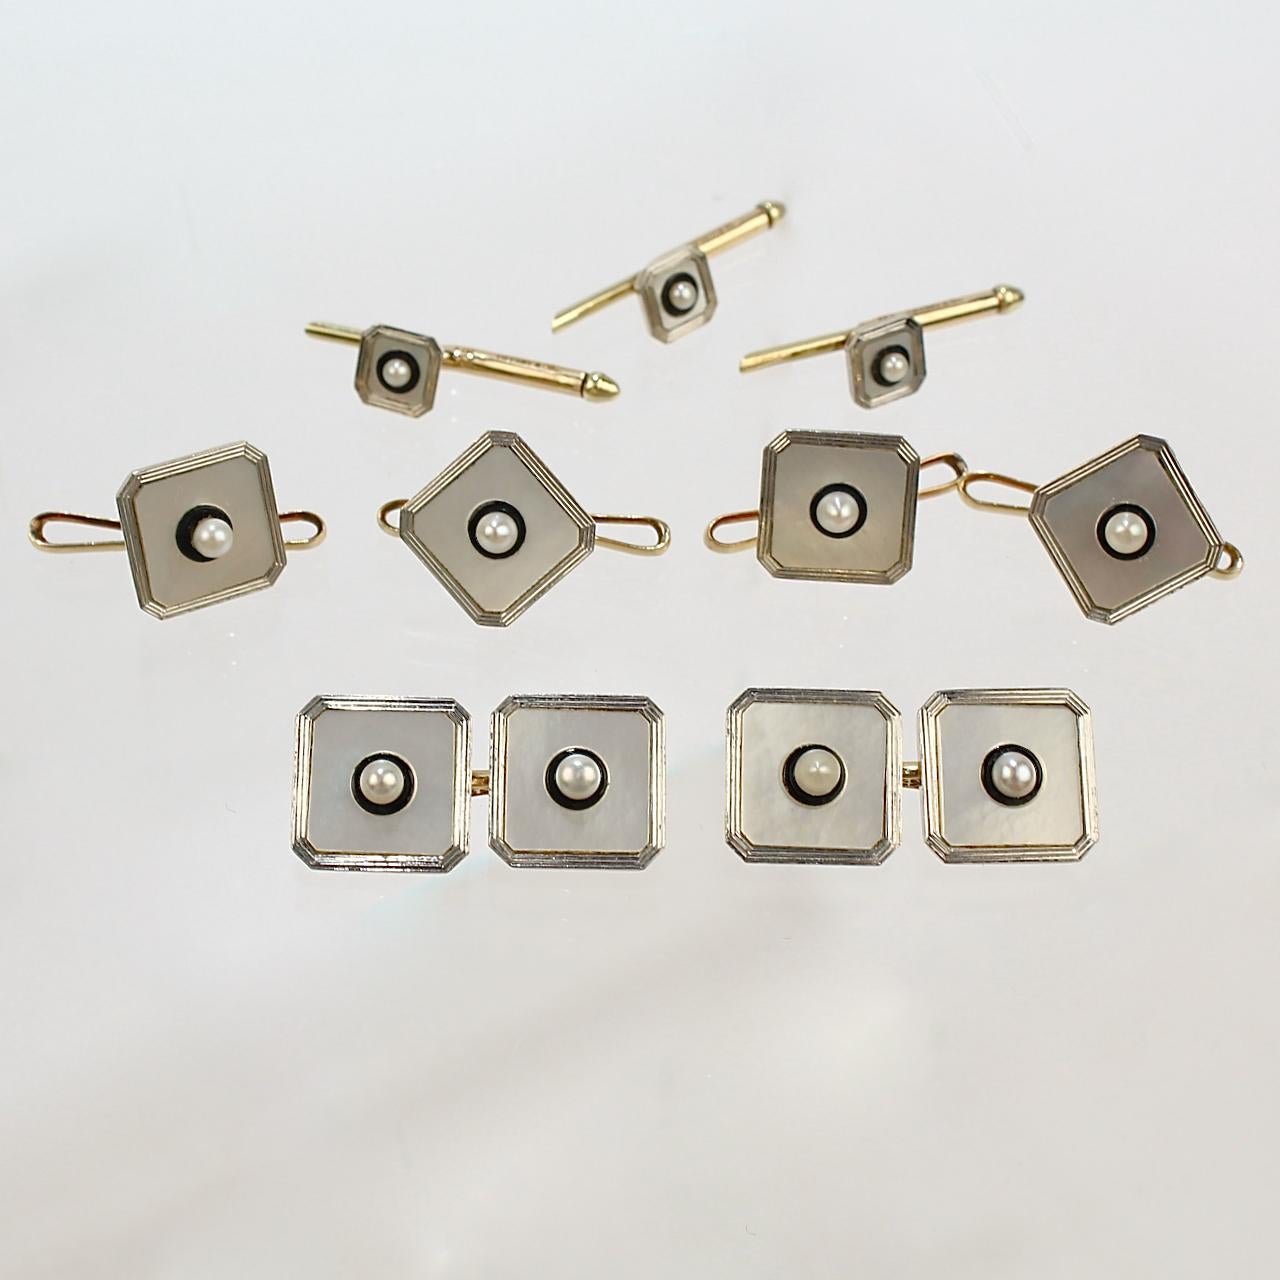 Round Cut Tiffany & Co Art Deco Cufflink Dress Set in 14K Gold & Platinum with Seed Pearls